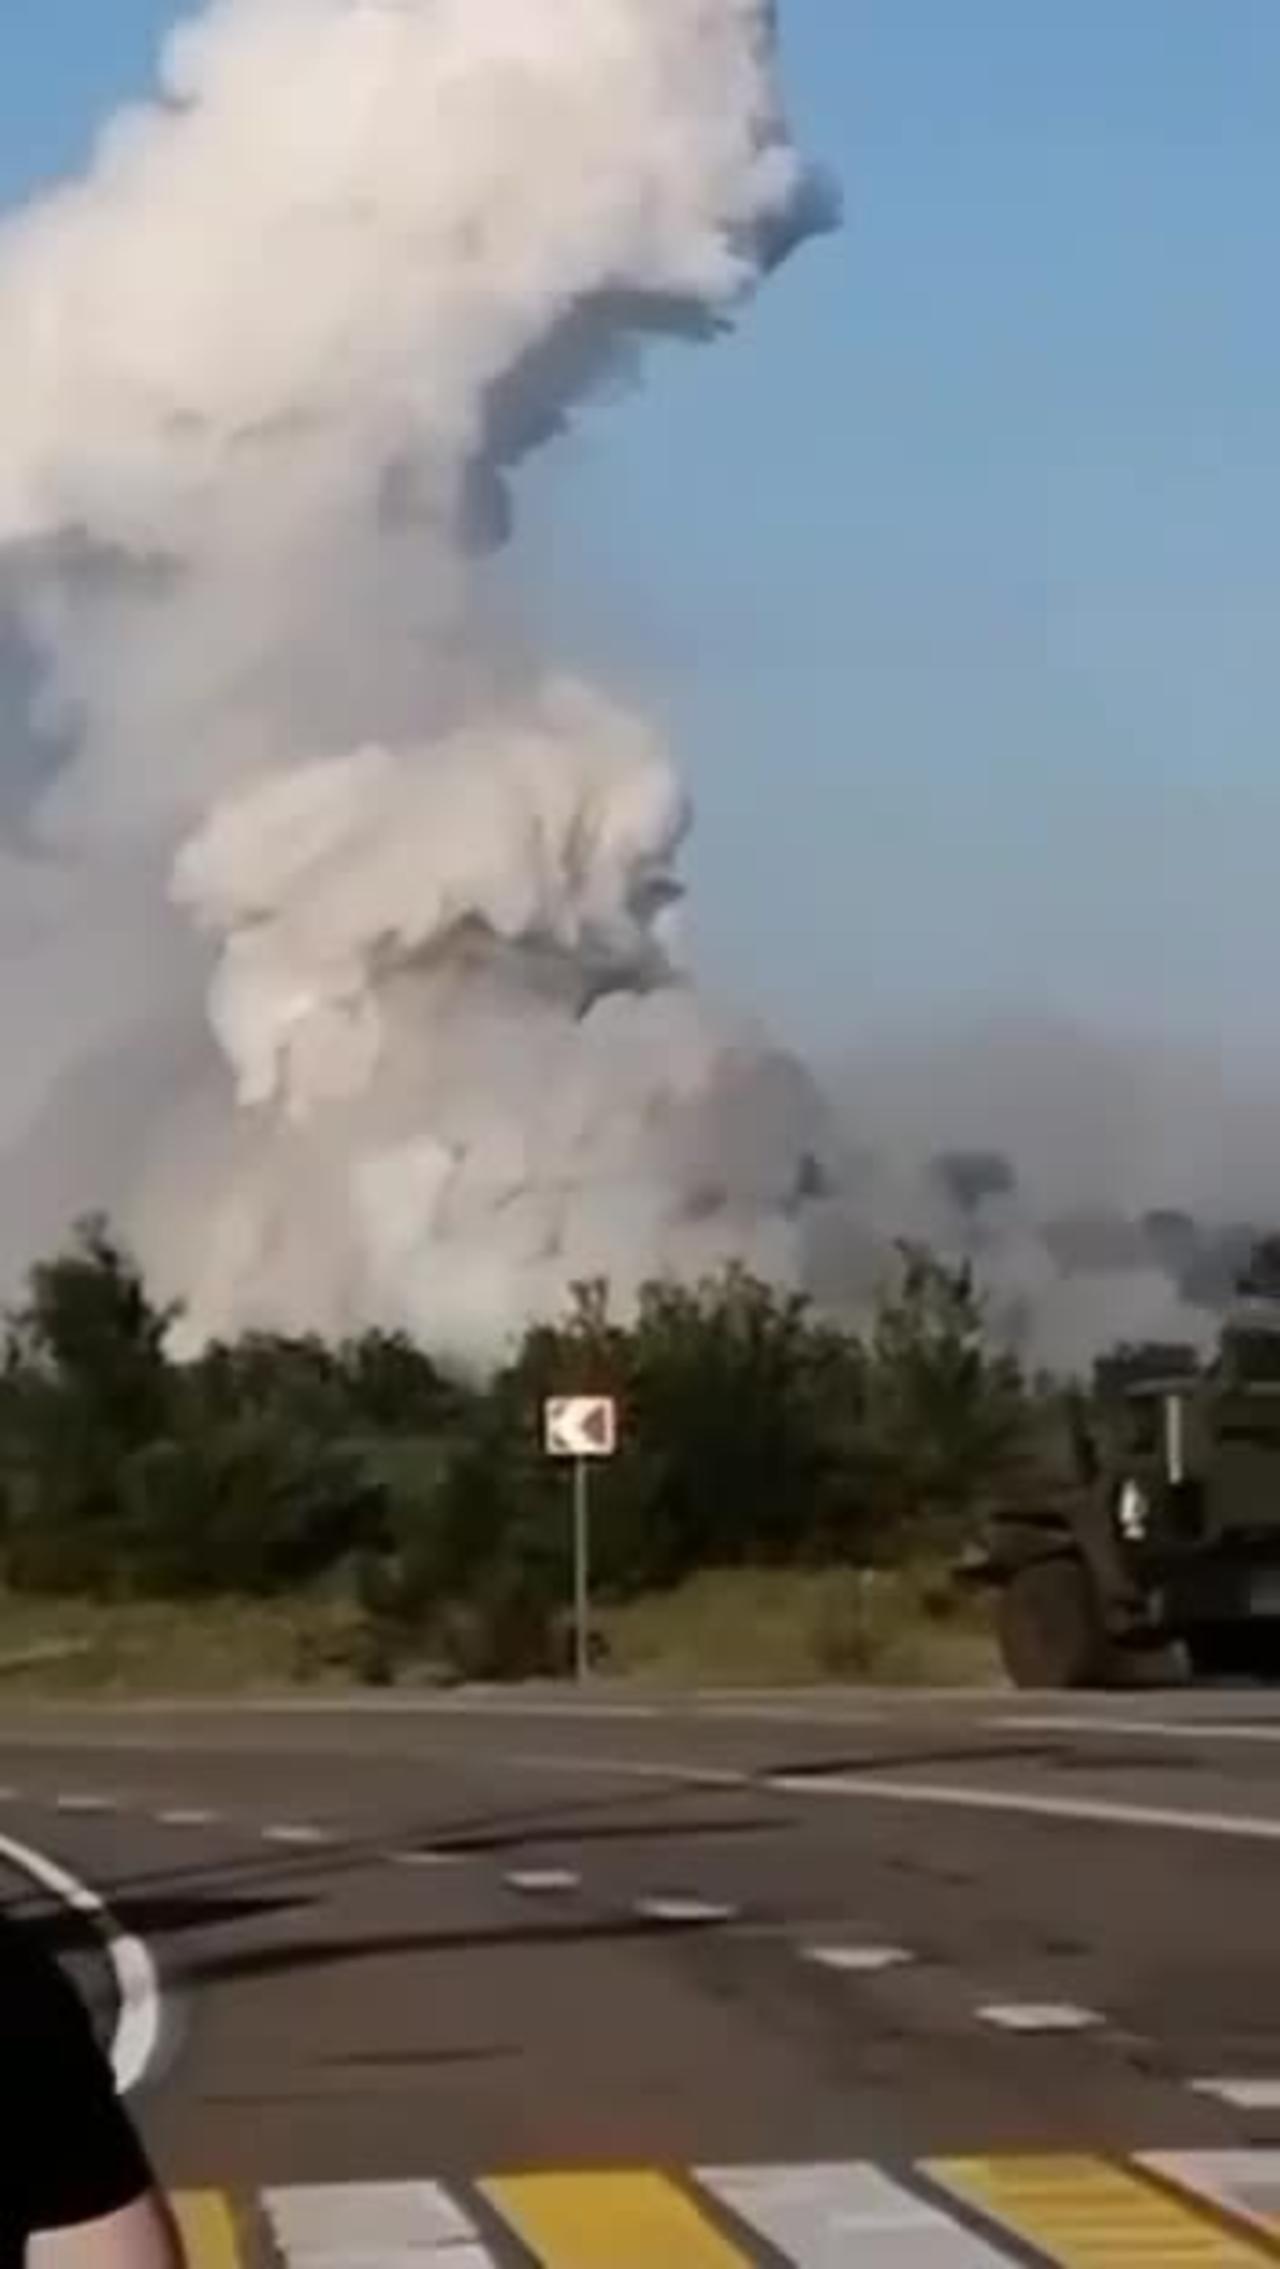 🔥👀 An explosion at an ammunition depot in the Voronezh region - work of